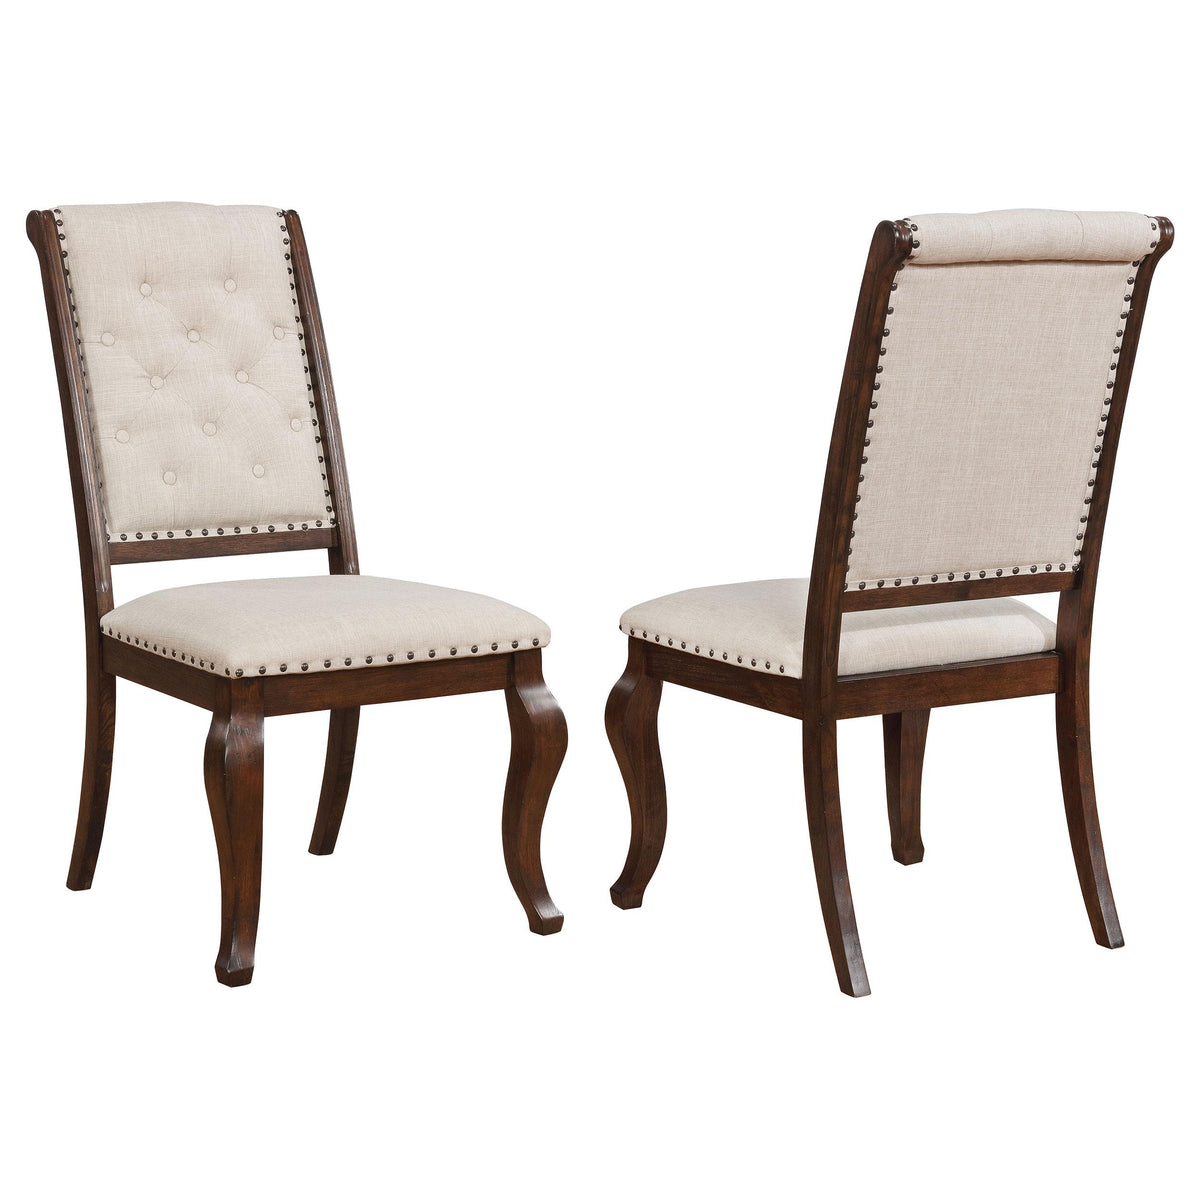 Brockway Tufted Dining Chairs Cream and Antique Java (Set of 2)  Las Vegas Furniture Stores